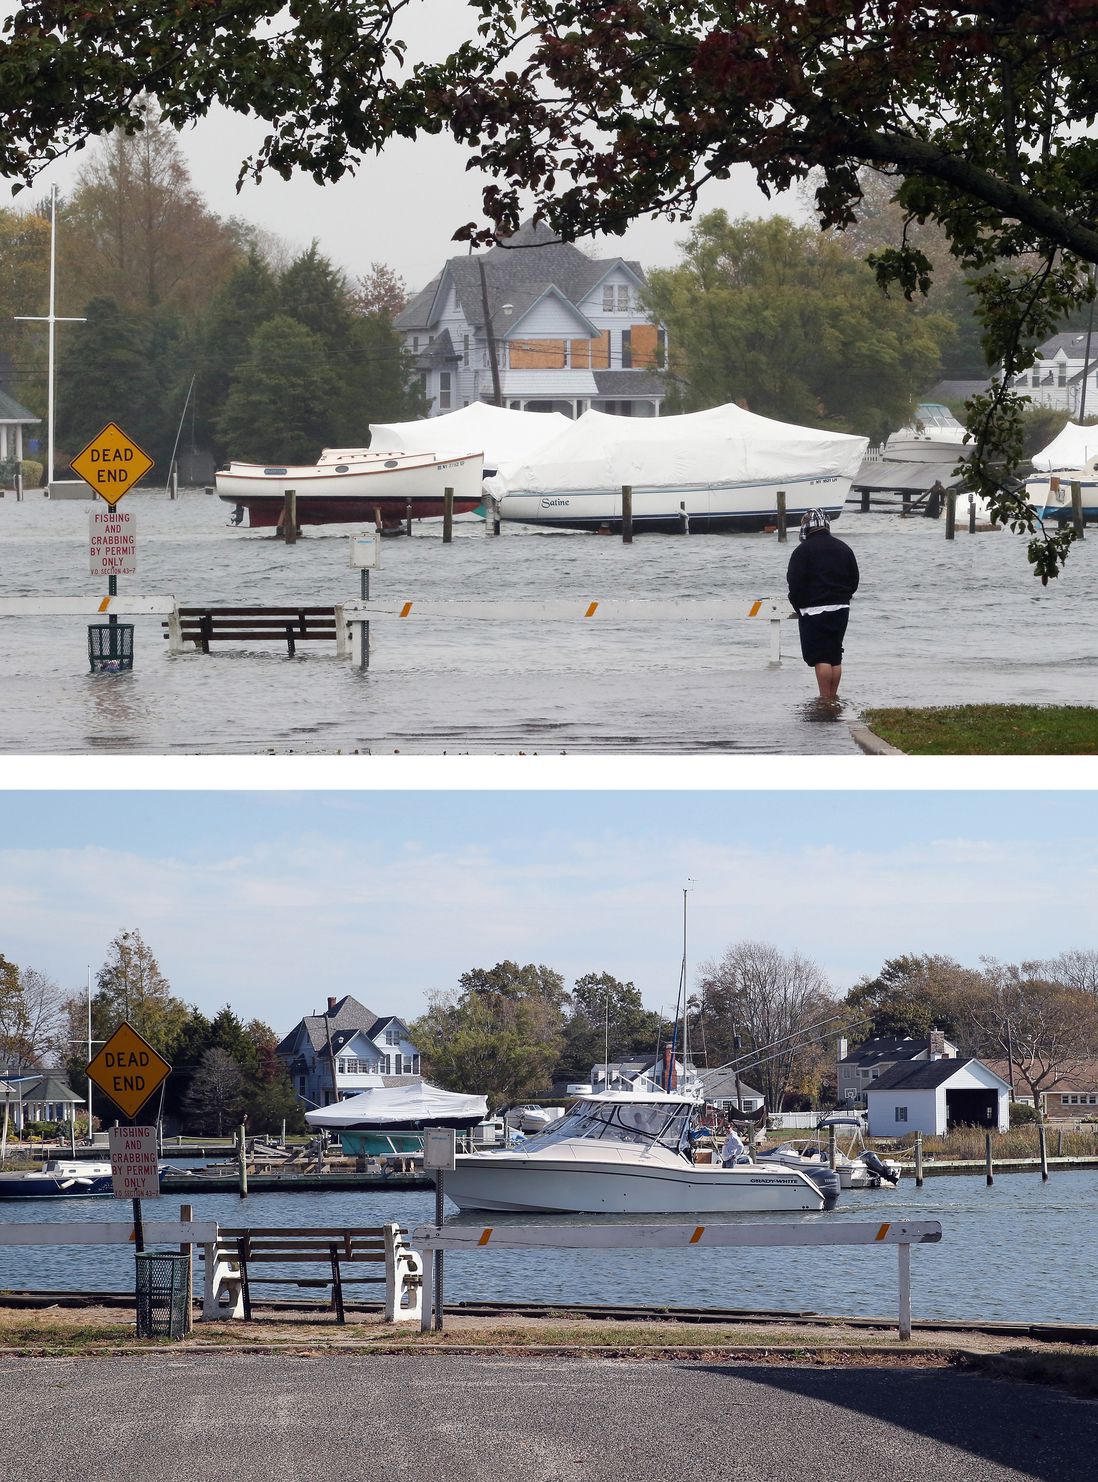 [Top] A visitor braves the elements on a partially submerged Coles Avenue as high tide and winds flood the streets on October 29, 2012 in Amityville, New York. [Bottom] A boat floats in the water off Coles Avenue on October 22, 2013 in Amityville, New York.